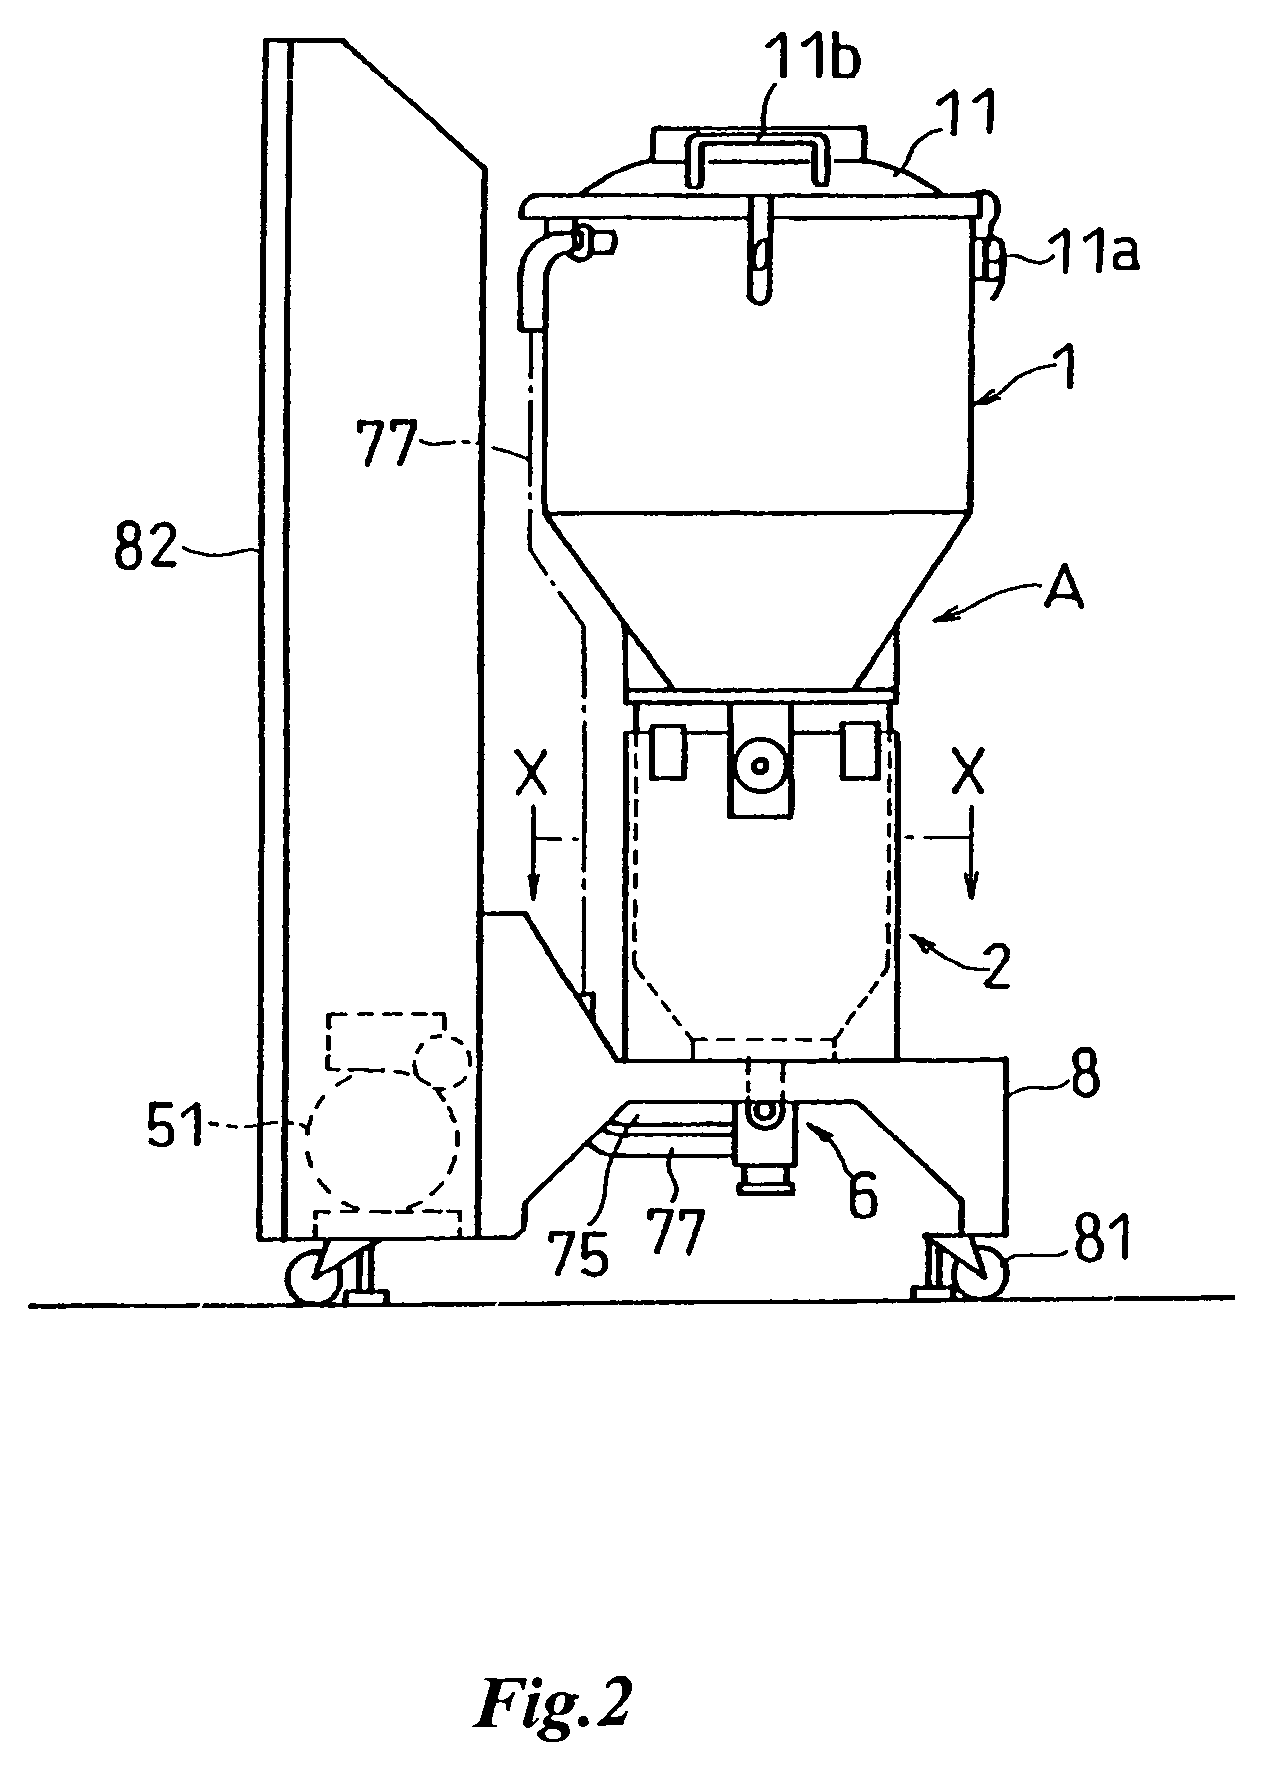 Drying-storing apparatus for powdered or granular material and feeding system for powdered or granular material